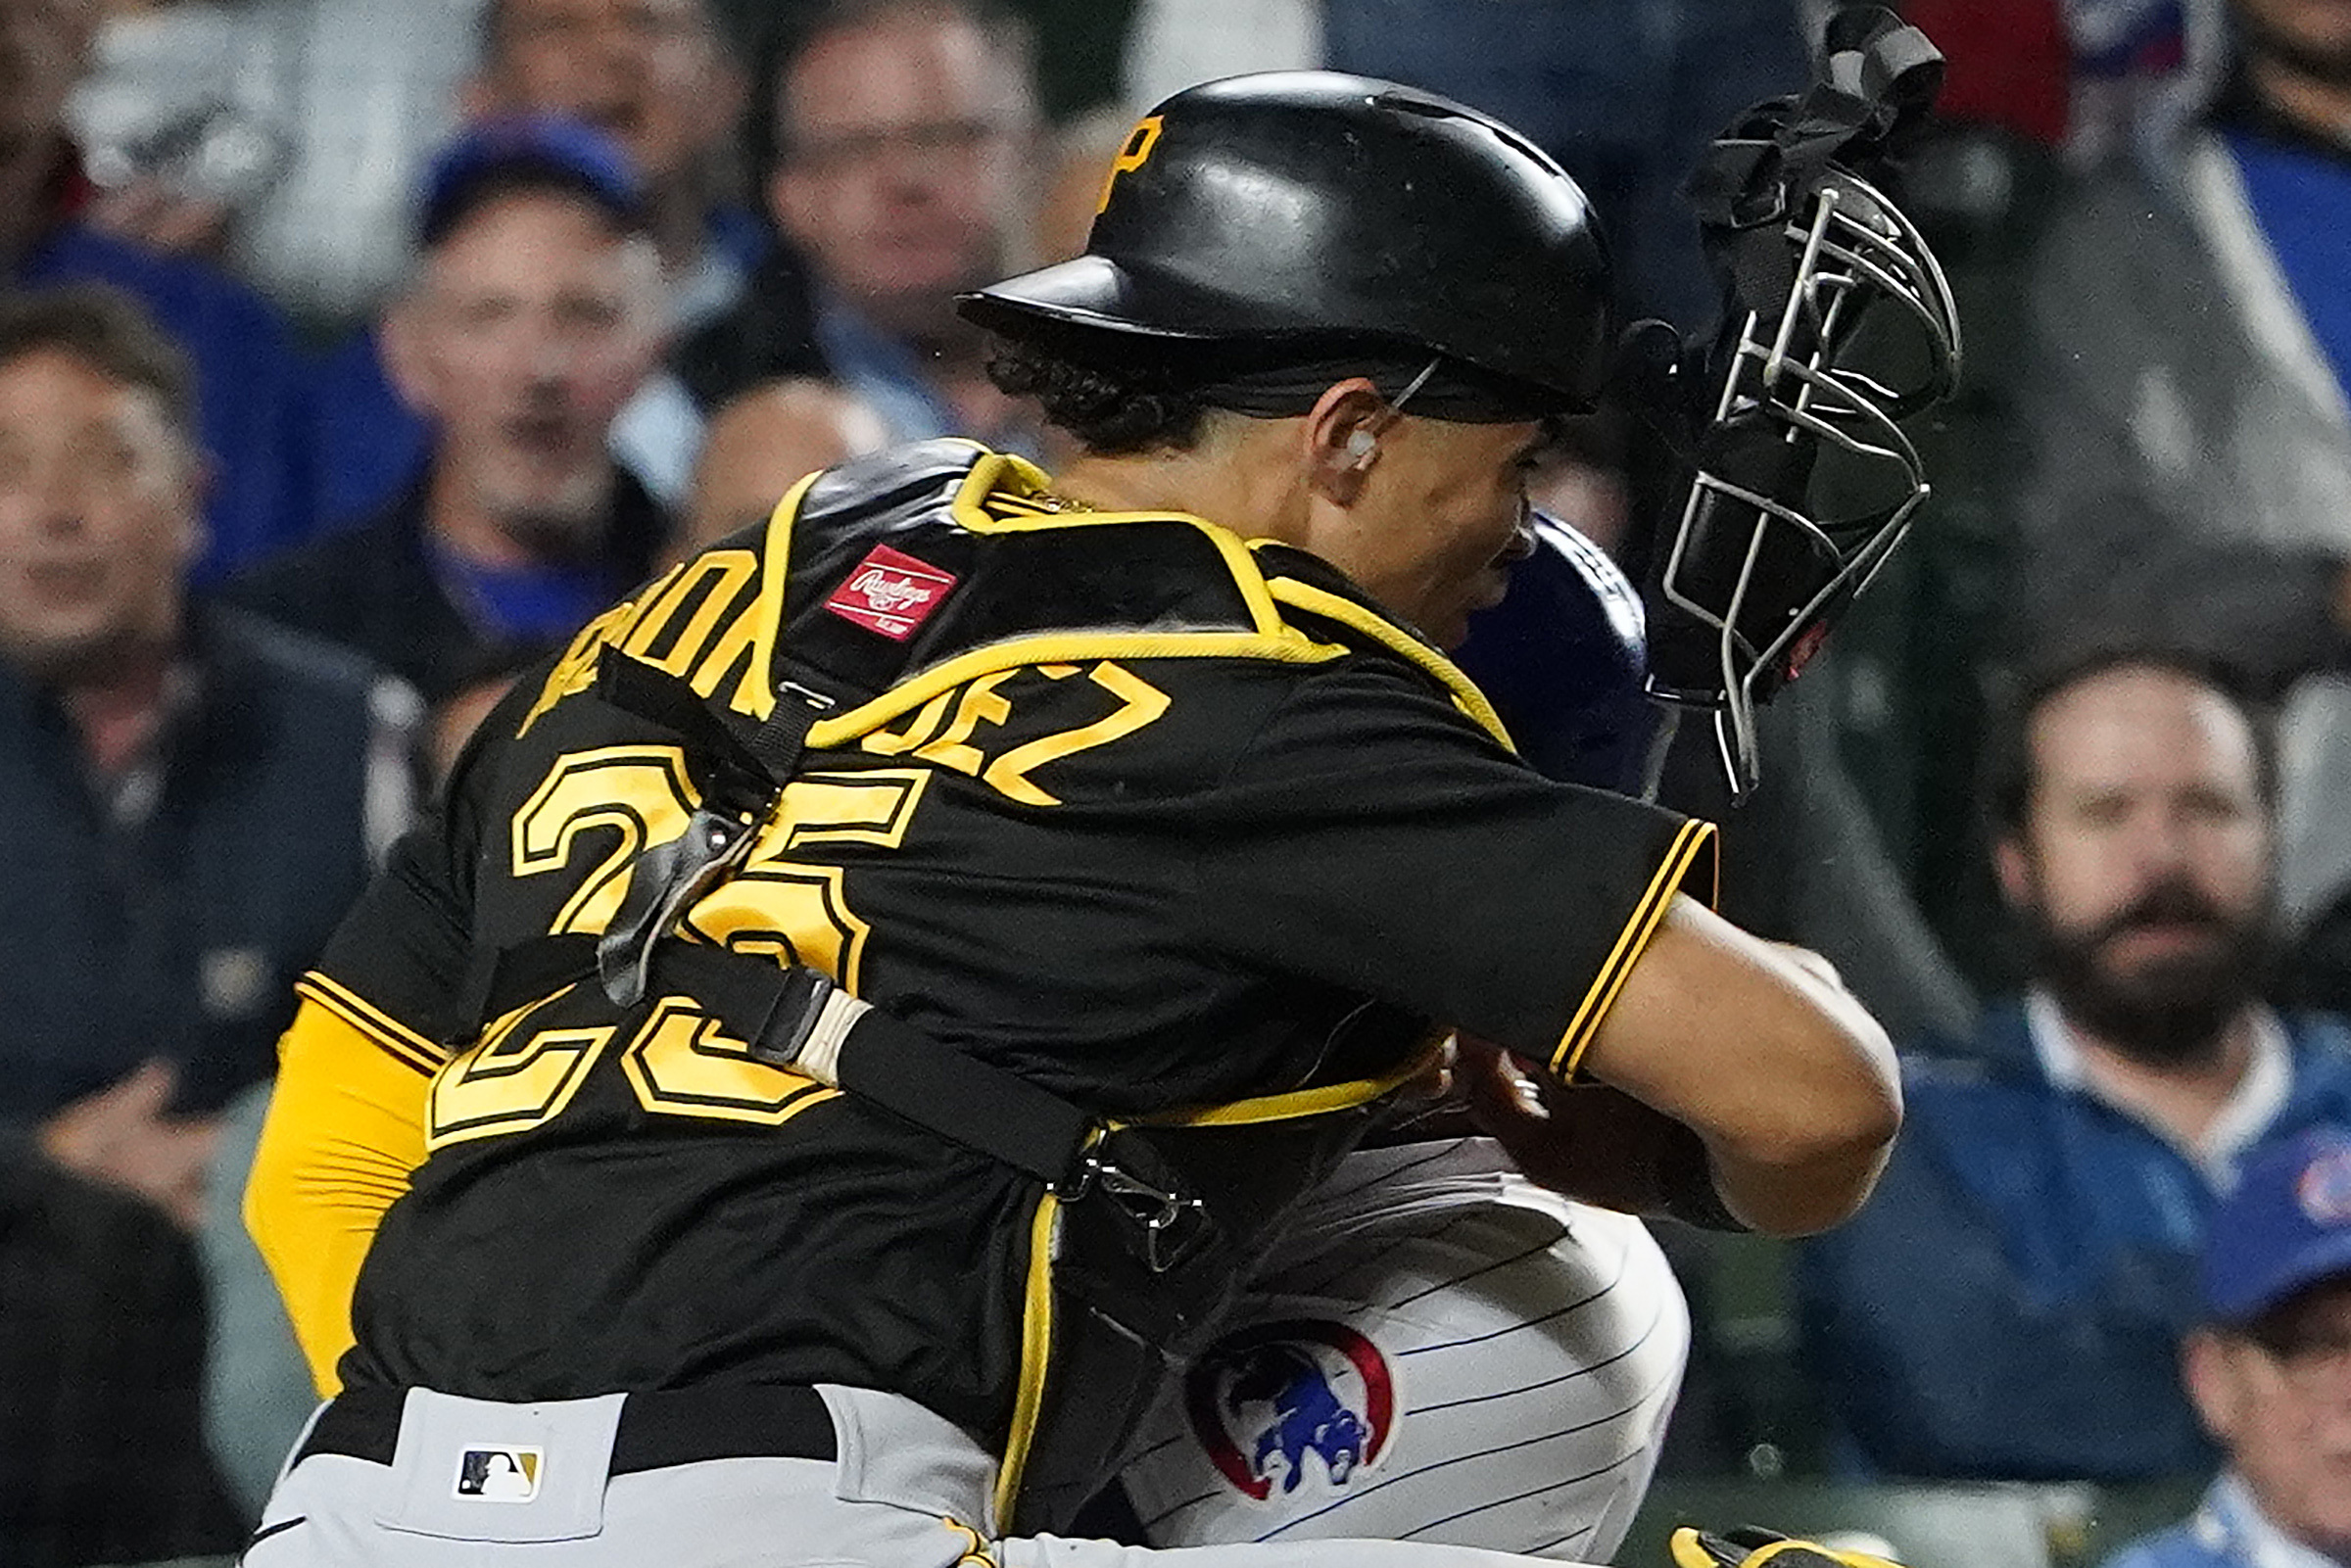 Alexander Canario hits grand slam and Cubs rout Pirates - CBS Chicago